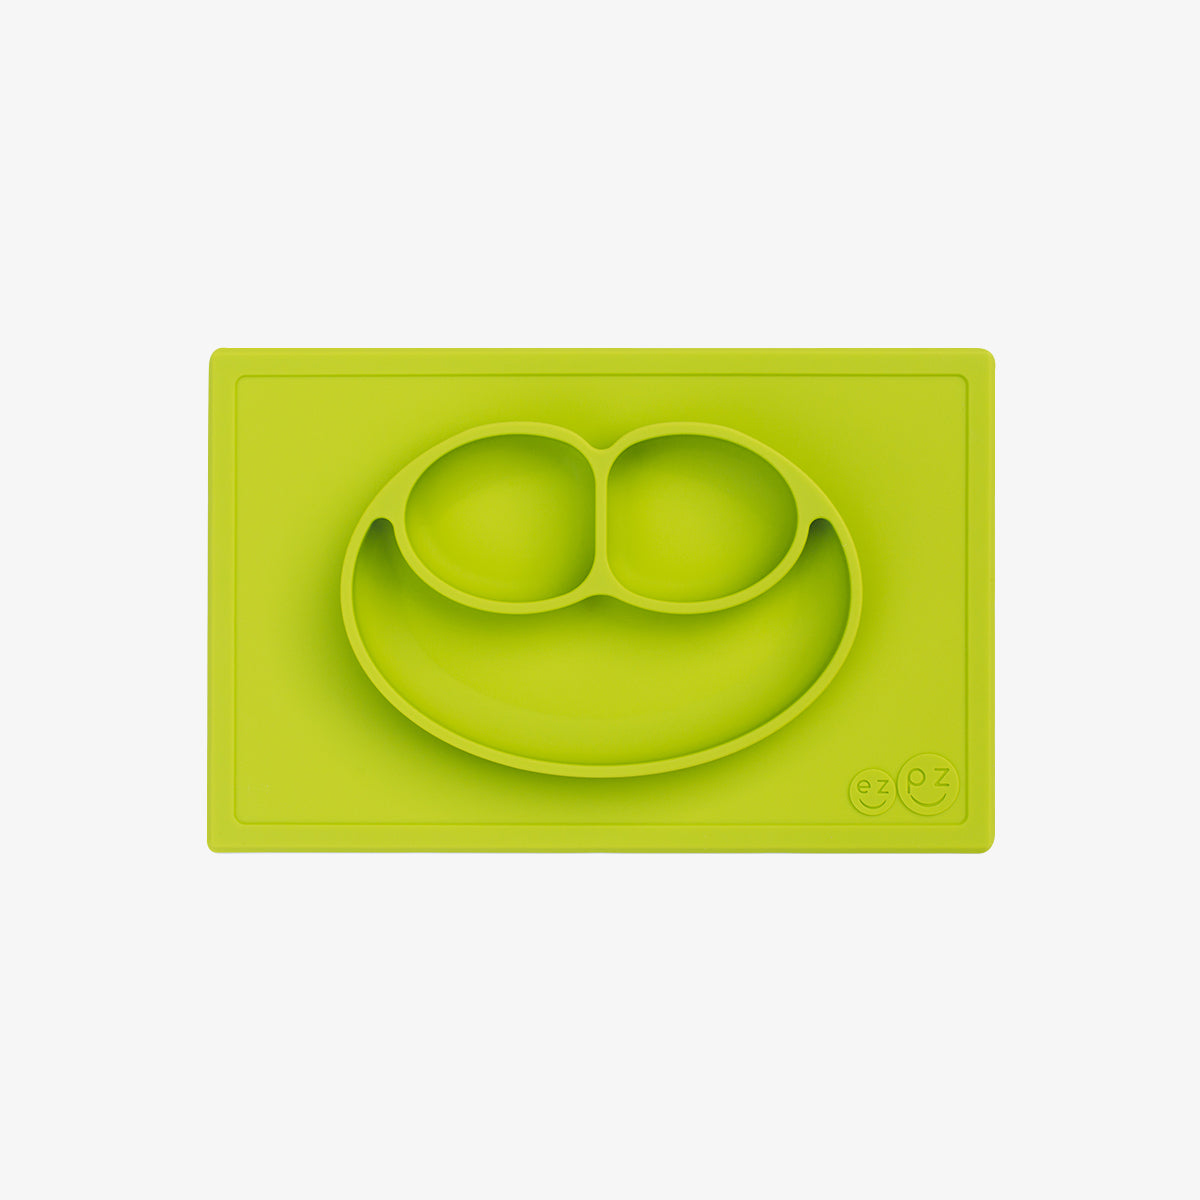 Happy Mat in Lime by ezpz / The Original All-In-One Silicone Plates & Placemats that Stick to the Table